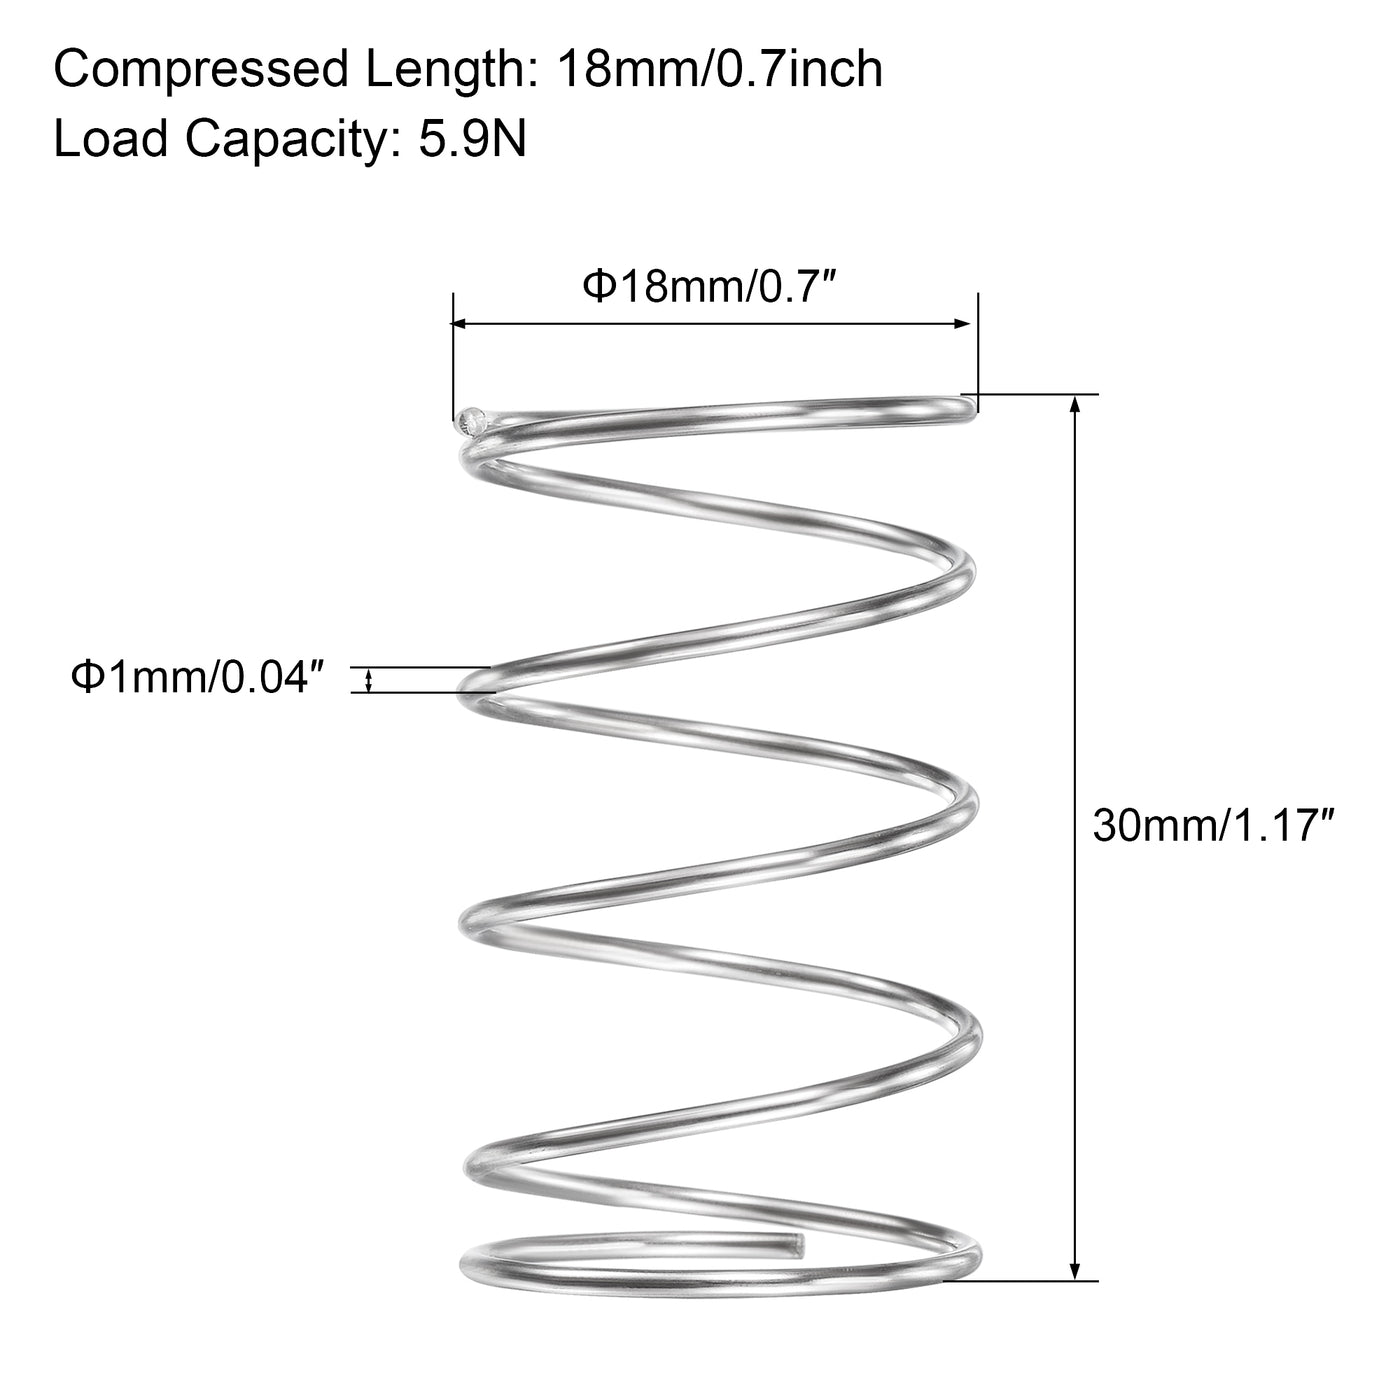 uxcell Uxcell 18mmx1mmx30mm 304 Stainless Steel Compression Spring 5.9N Load Capacity 5pcs